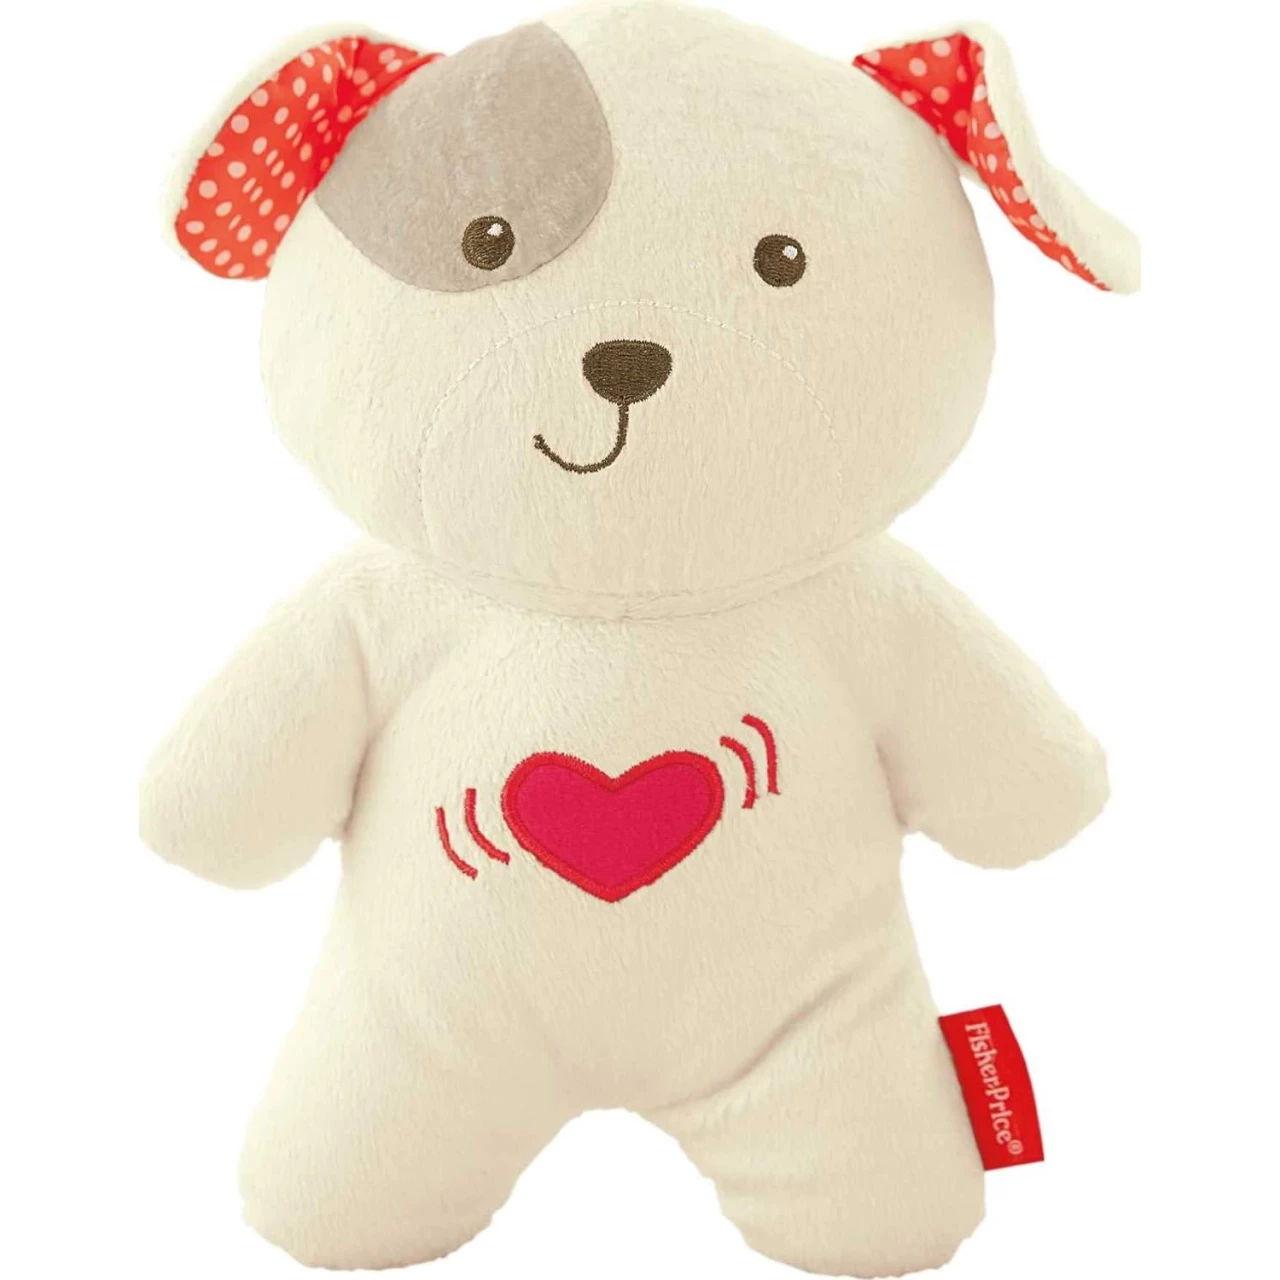 Fisher Price Portable Sound Machine Calming Vibrations Cuddle Soother Plush Dog Infant Toy